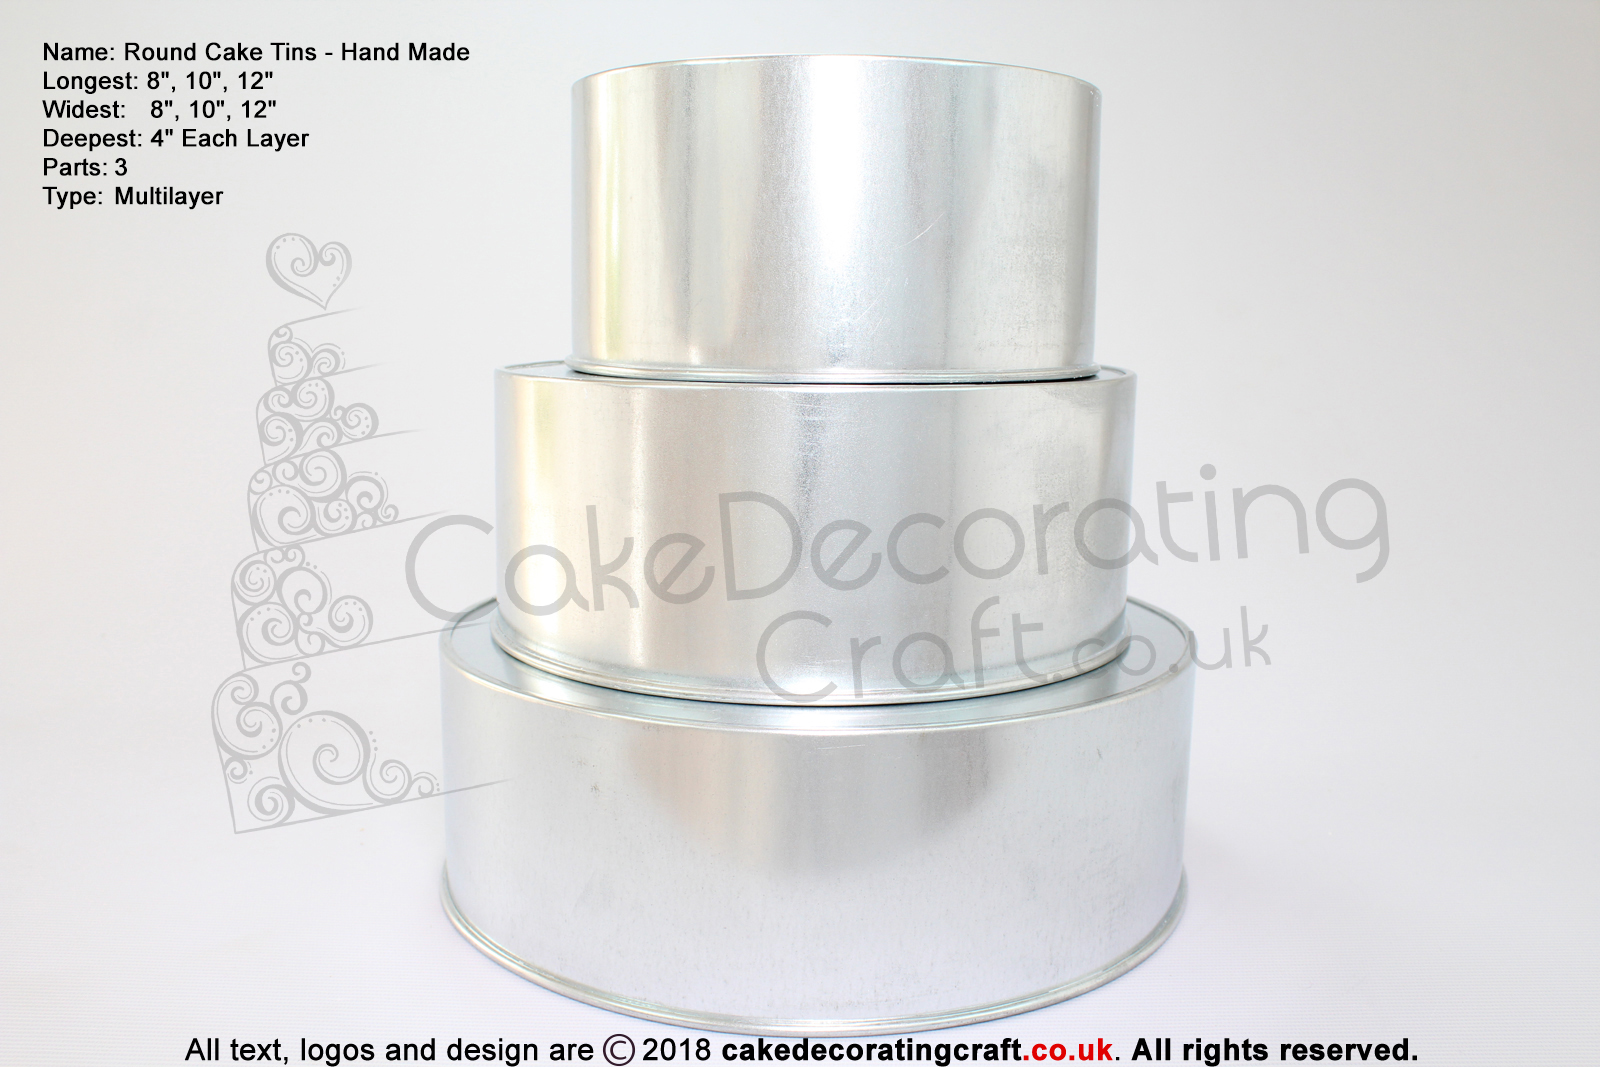 Round Cake Baking Tin | 4" Deep | Size 8 10 12 " | 3 Tiers | Hand Made